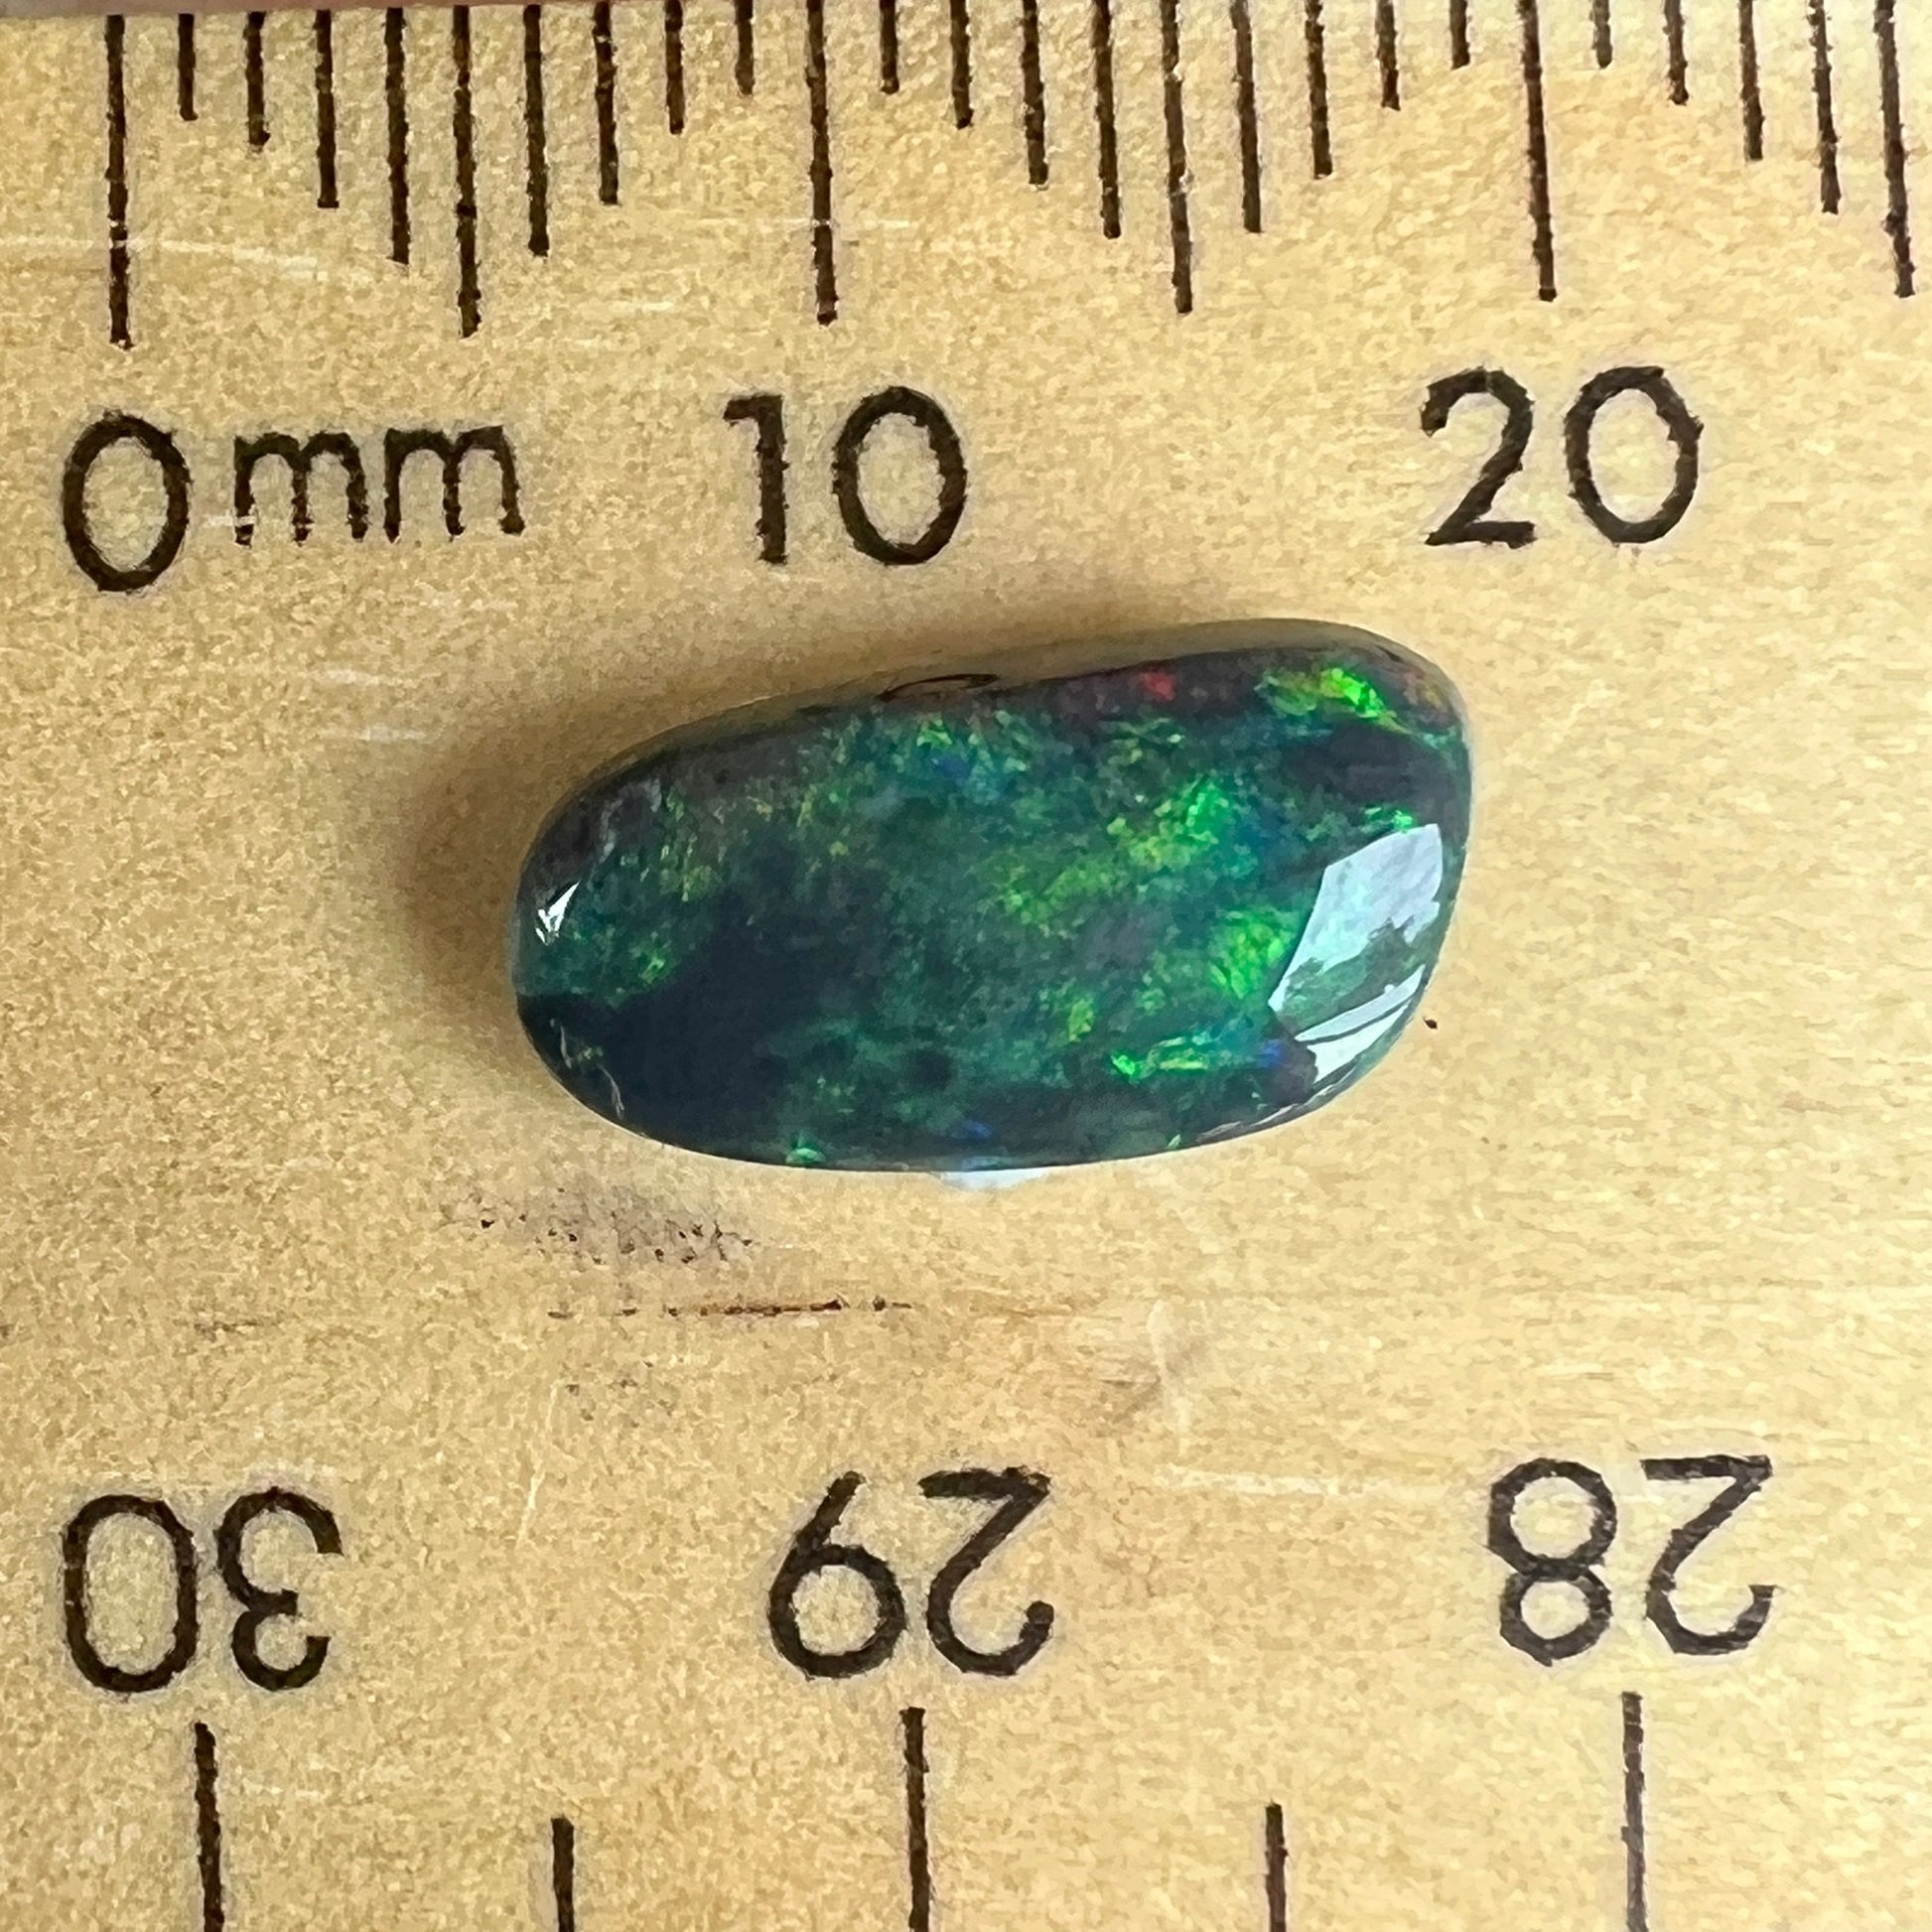 Stunning black opal from the outback opal mines of Lightning Ridge, Beautifully cut and displaying magnificent greens.